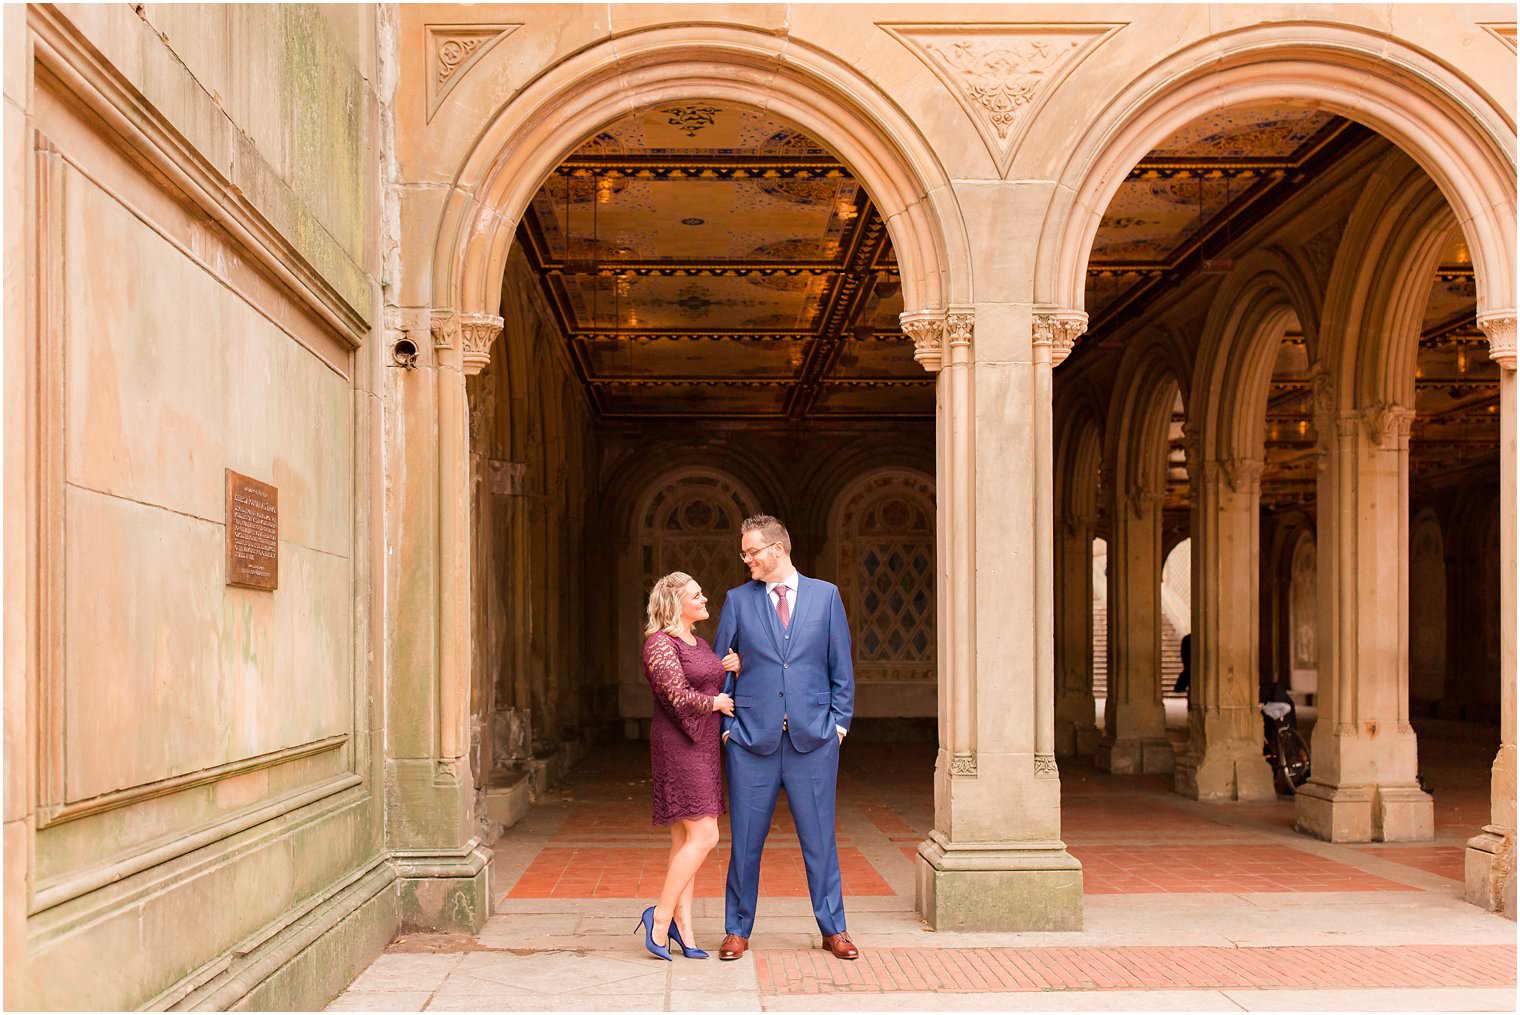 Engaged couple in Bethesda Terrace